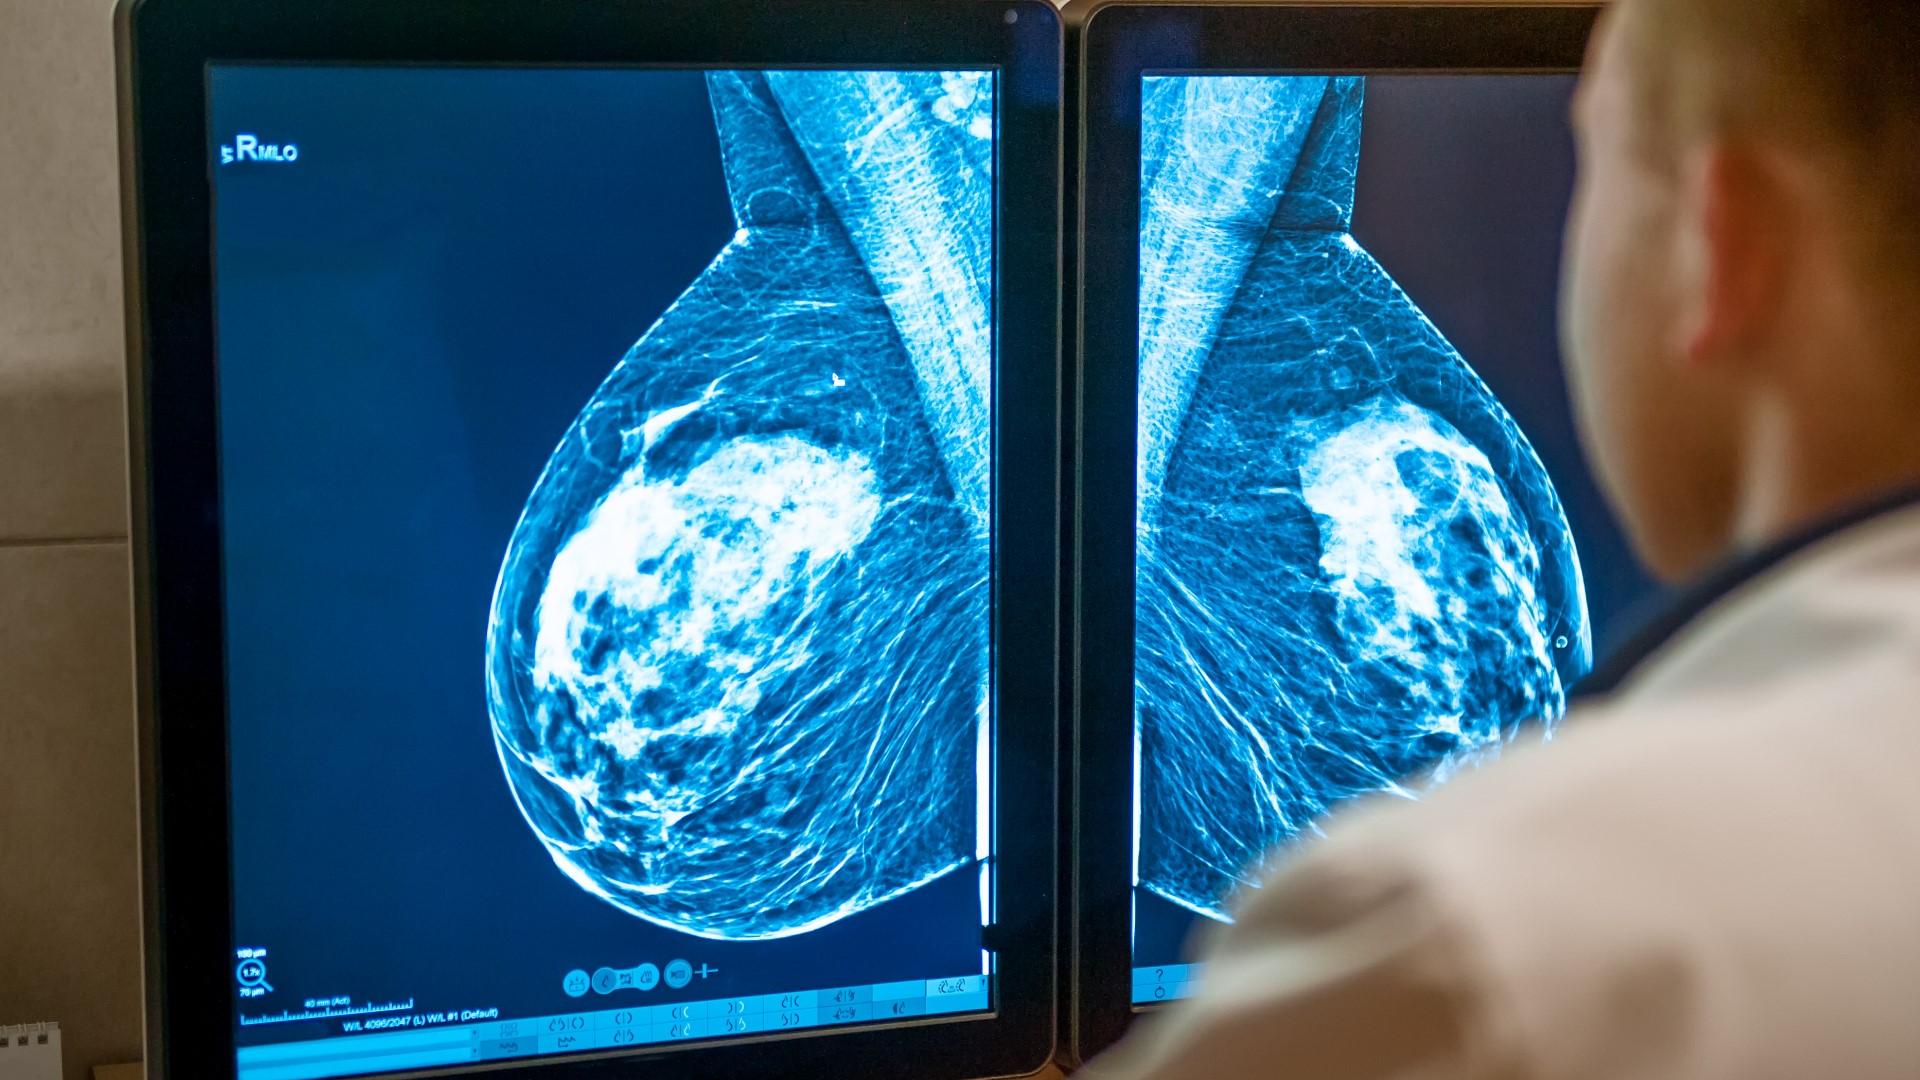 Getting screened for breast cancer can be key to stopping it. Knowing when to go and what to expect can help make it easier.